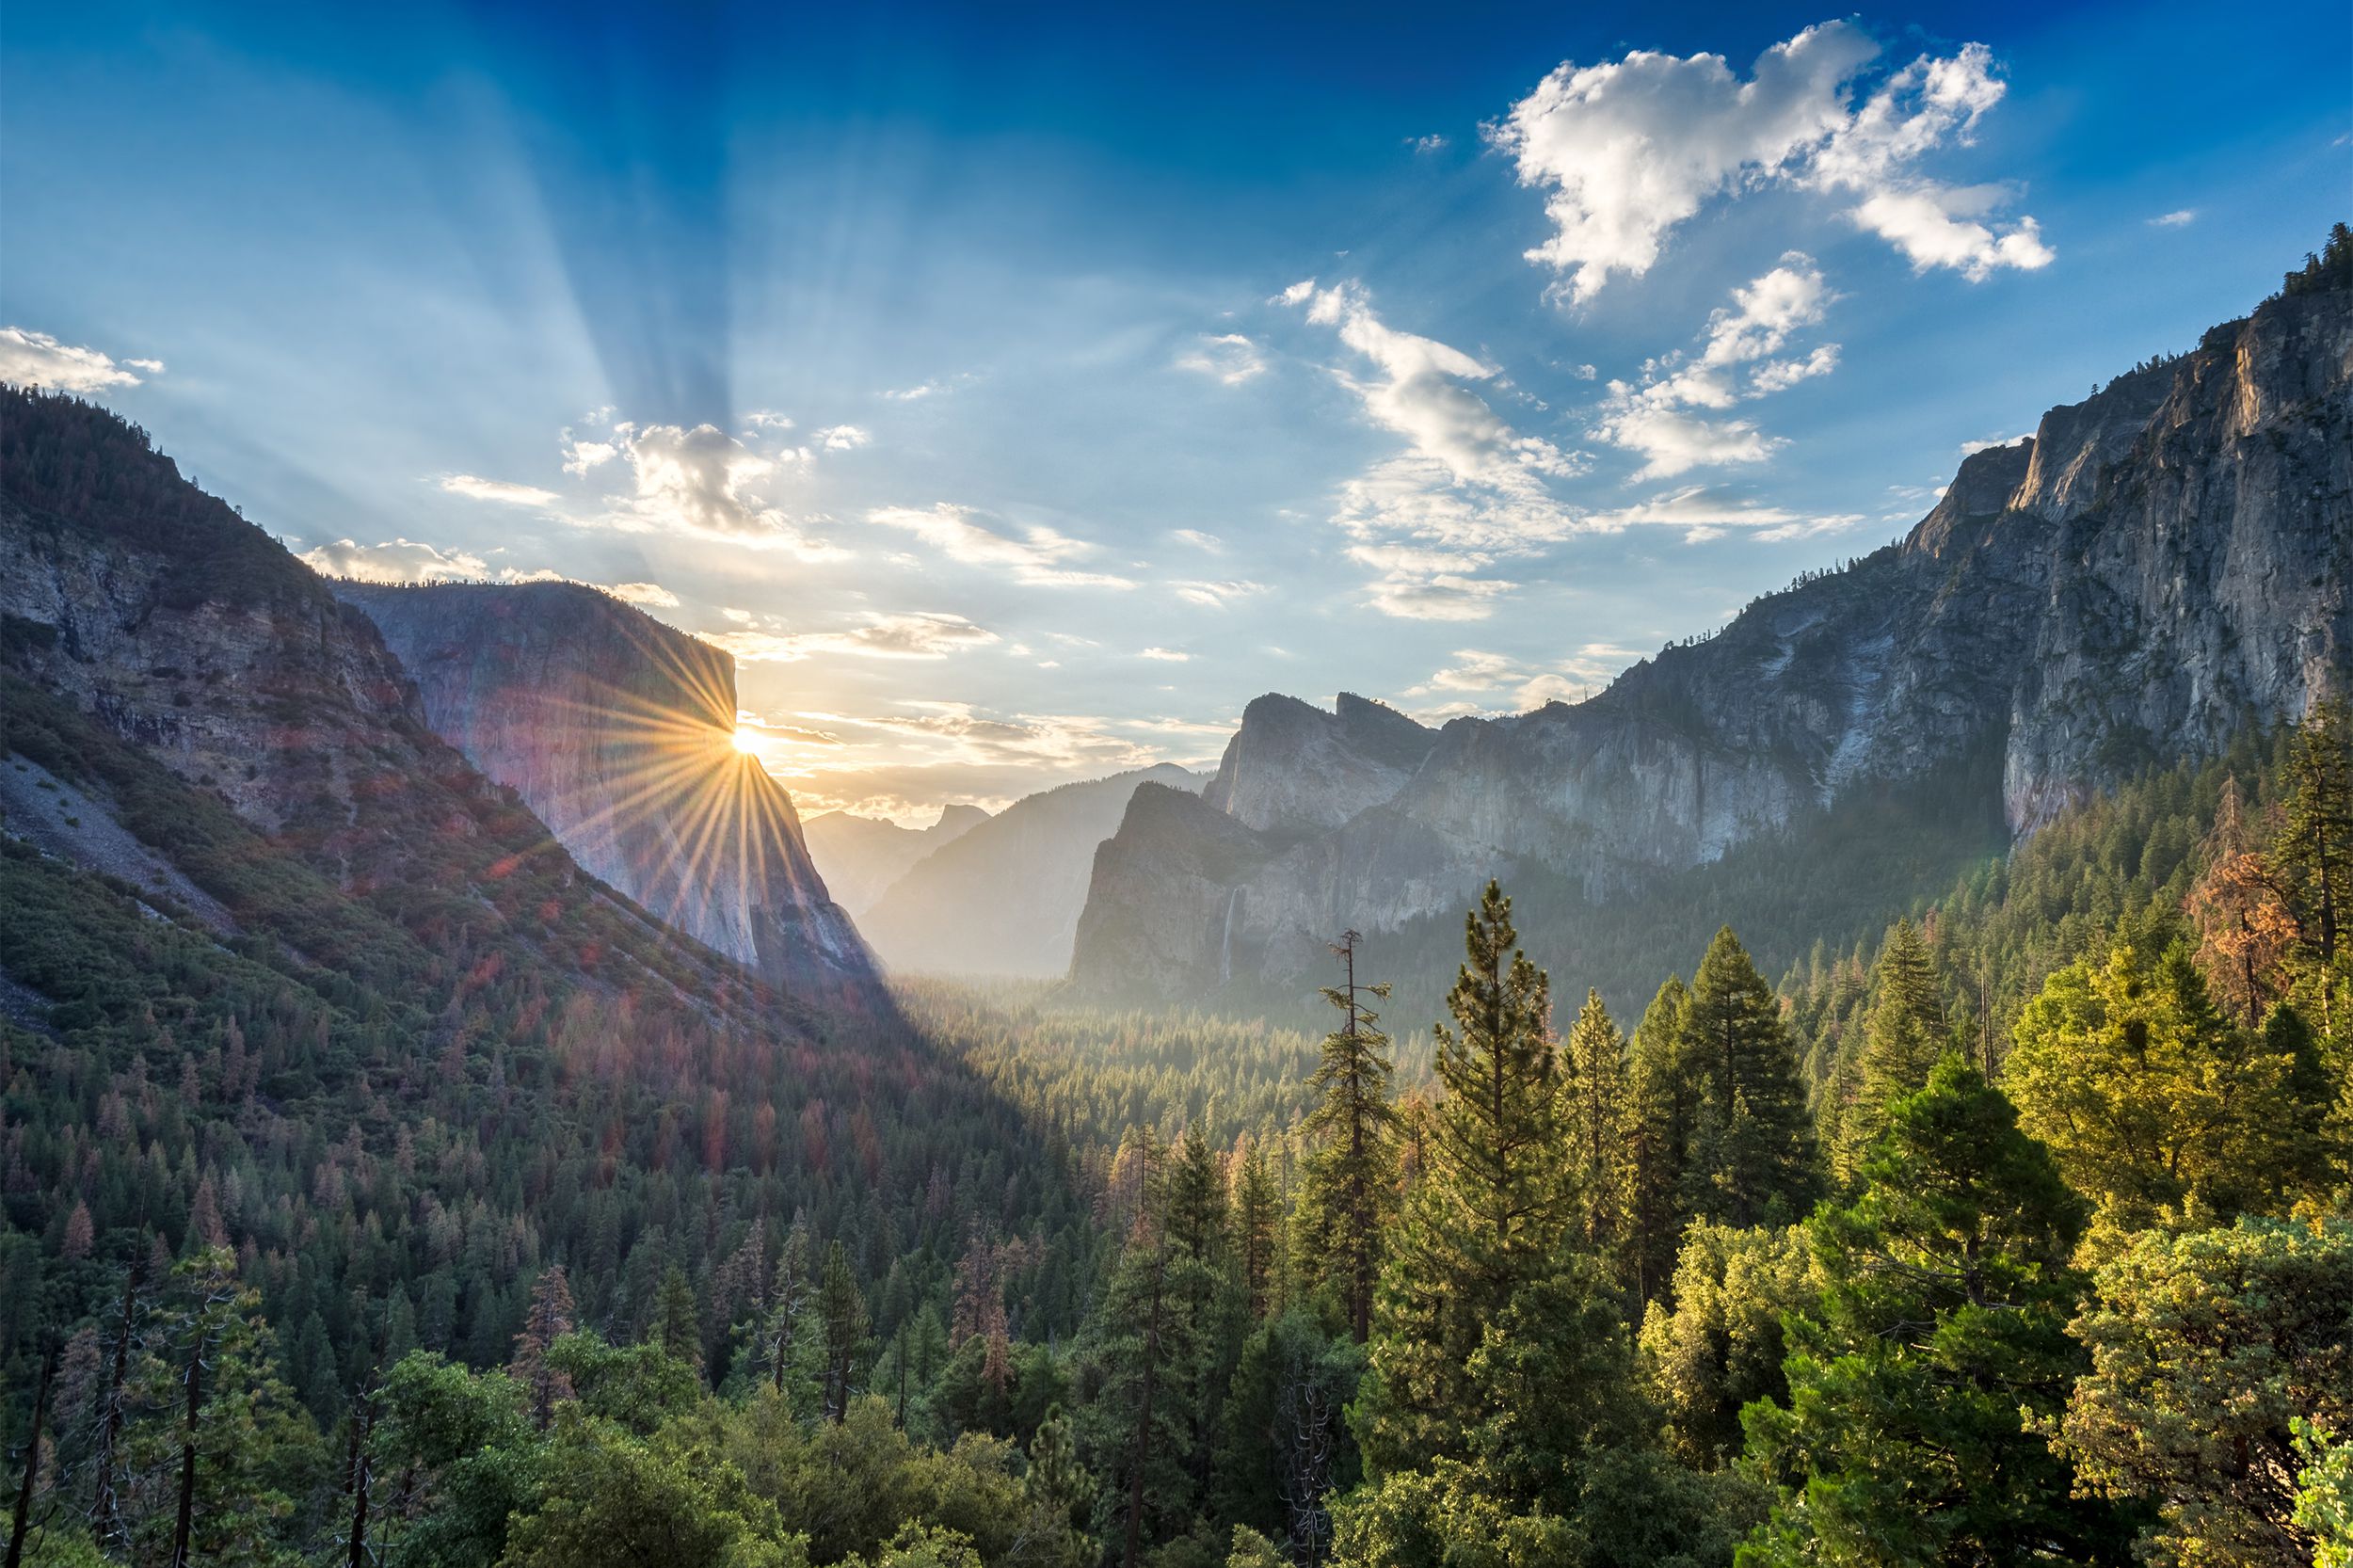 One of the most famous tourist destinations in California and the location of some of the most iconic pictures taken by famed photographer Ansel Adams, <a href="https://www.nps.gov/yose/index.htm">Yosemite</a> offers everything from waterfalls to meadows and ancient sequoias within its vast and unforgettable wilderness.